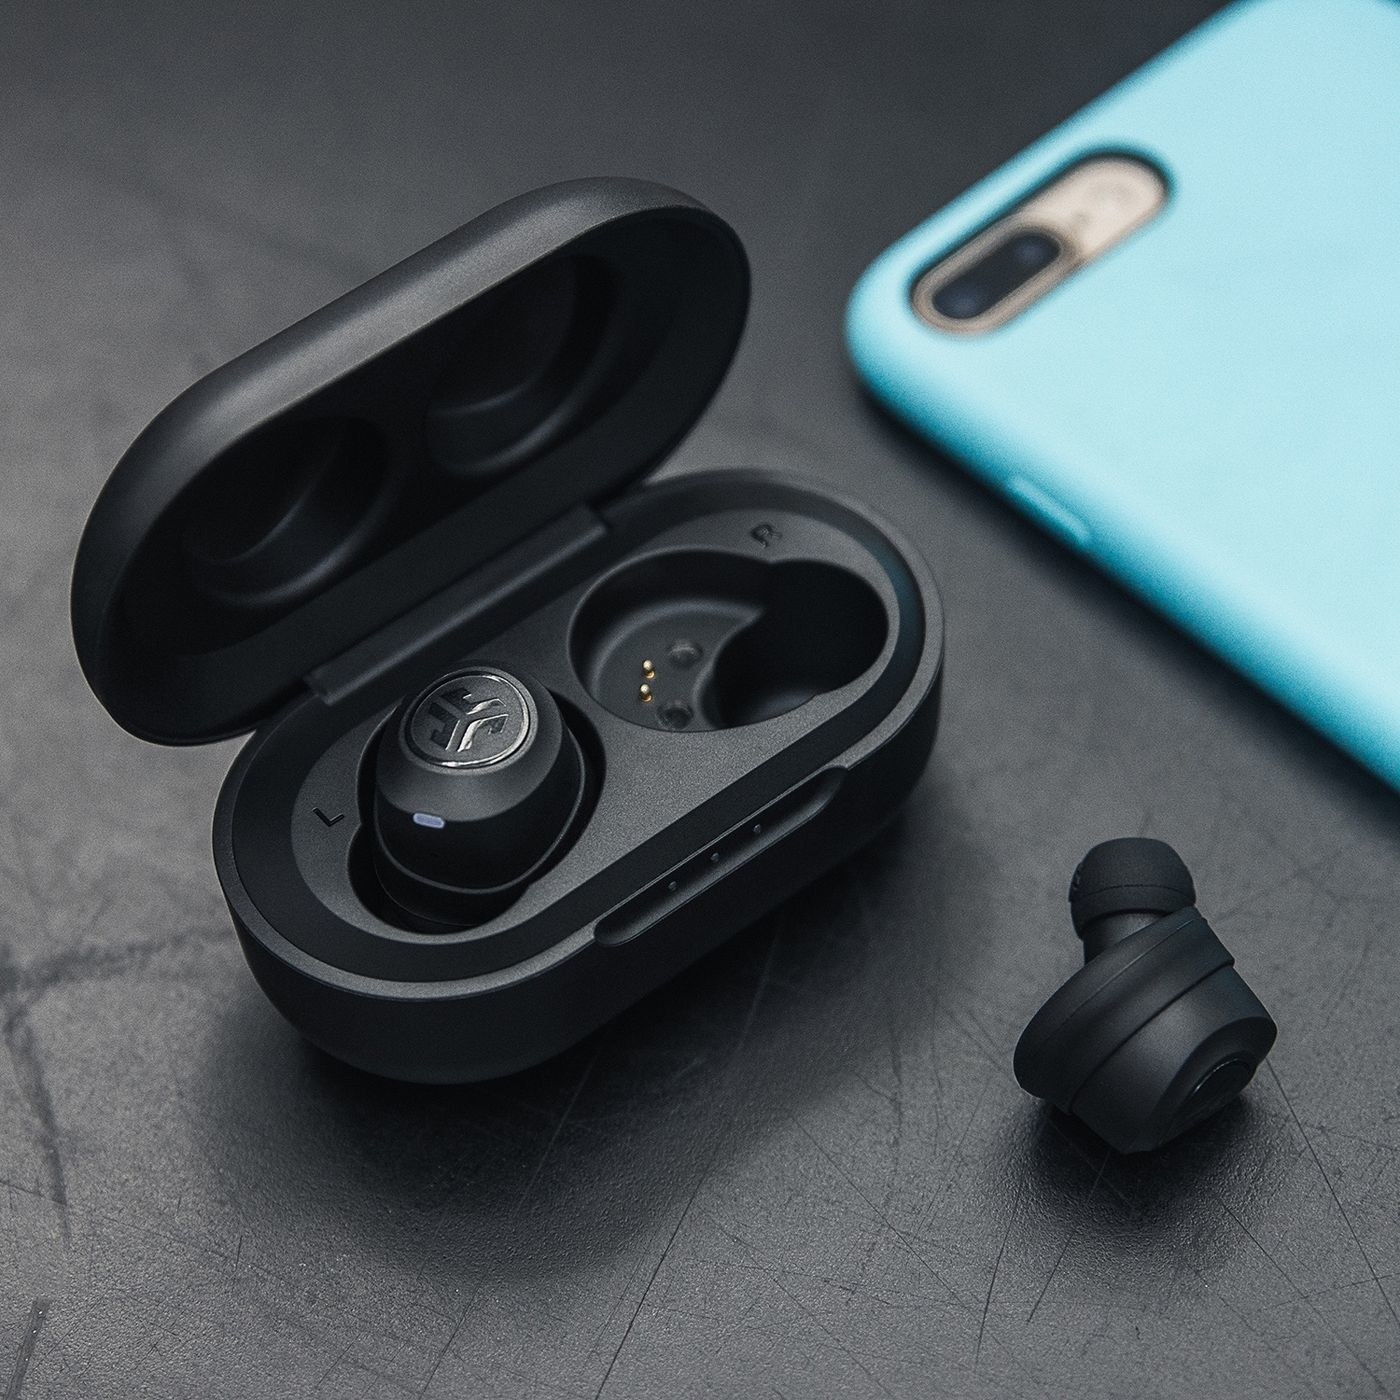 The wireless earbuds in their charging case next to a smart phone